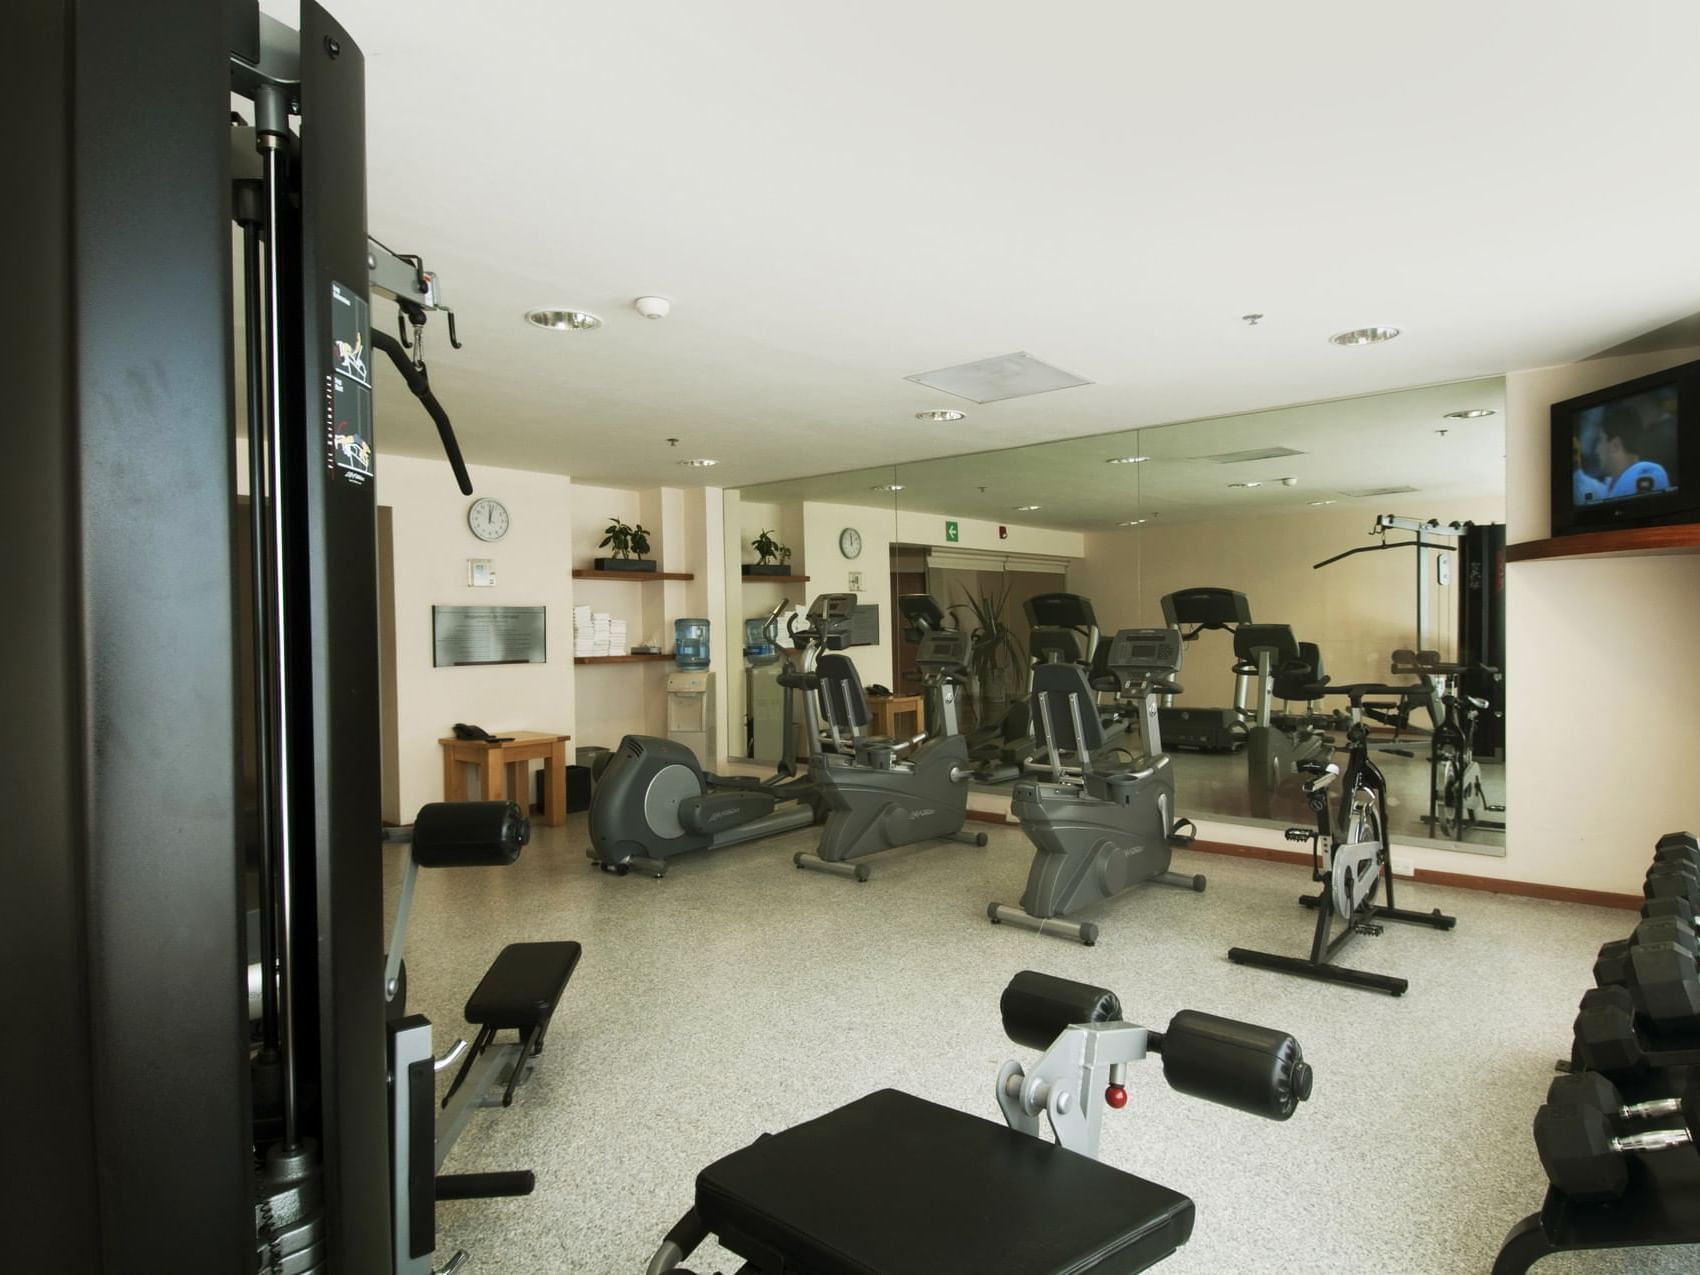 Exercise Machines in Gym Wellness Center at Fiesta Inn Hotels